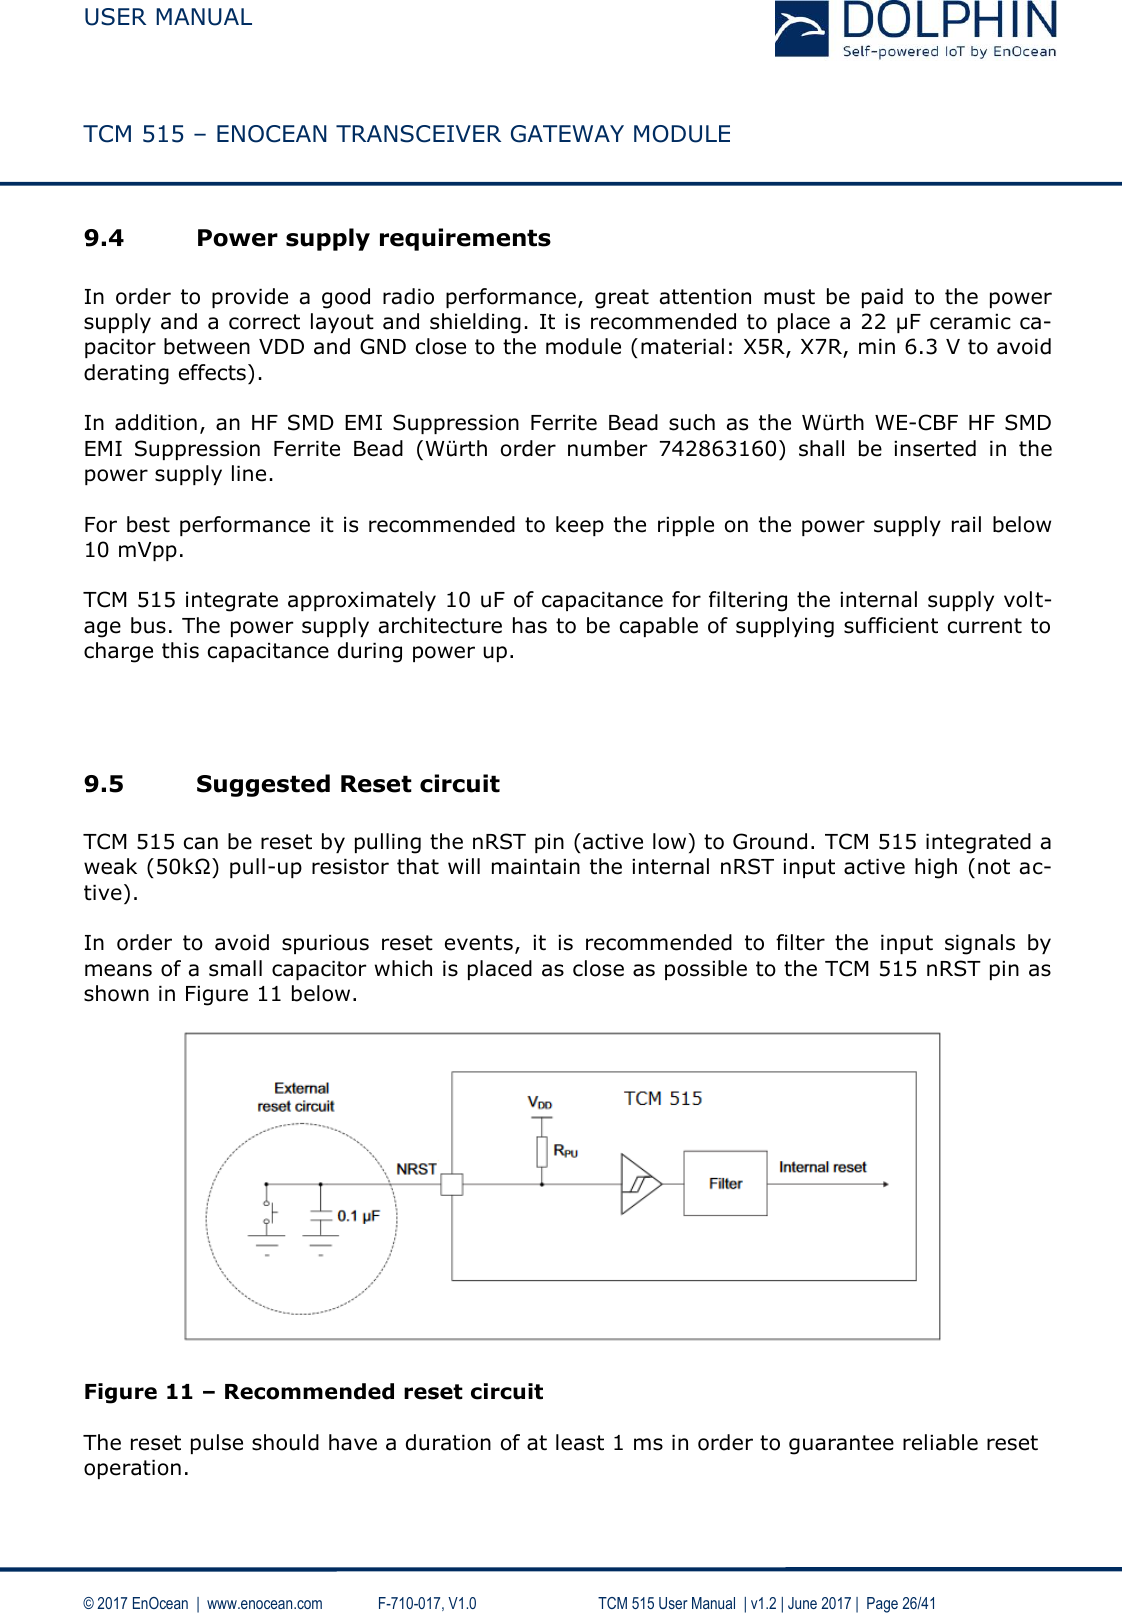  USER MANUAL    TCM 515 – ENOCEAN TRANSCEIVER GATEWAY MODULE  © 2017 EnOcean  |  www.enocean.com   F-710-017, V1.0        TCM 515 User Manual  | v1.2 | June 2017 |  Page 26/41  9.4 Power supply requirements  In order  to provide a good  radio performance, great attention must  be paid to the  power supply and a correct layout and shielding. It is recommended to place a 22 µF ceramic ca-pacitor between VDD and GND close to the module (material: X5R, X7R, min 6.3 V to avoid derating effects).   In addition, an HF SMD EMI Suppression Ferrite Bead such as the Würth WE-CBF HF SMD EMI  Suppression  Ferrite  Bead  (Würth  order  number  742863160)  shall  be  inserted  in  the power supply line.  For best performance it is recommended to keep the ripple on the power supply rail below 10 mVpp.  TCM 515 integrate approximately 10 uF of capacitance for filtering the internal supply volt-age bus. The power supply architecture has to be capable of supplying sufficient current to charge this capacitance during power up.    9.5 Suggested Reset circuit   TCM 515 can be reset by pulling the nRST pin (active low) to Ground. TCM 515 integrated a weak (50kΩ) pull-up resistor that will maintain the internal nRST input active high (not ac-tive).  In  order  to  avoid  spurious  reset  events,  it  is  recommended  to  filter  the  input  signals  by means of a small capacitor which is placed as close as possible to the TCM 515 nRST pin as shown in Figure 11 below.     Figure 11 – Recommended reset circuit  The reset pulse should have a duration of at least 1 ms in order to guarantee reliable reset operation.    